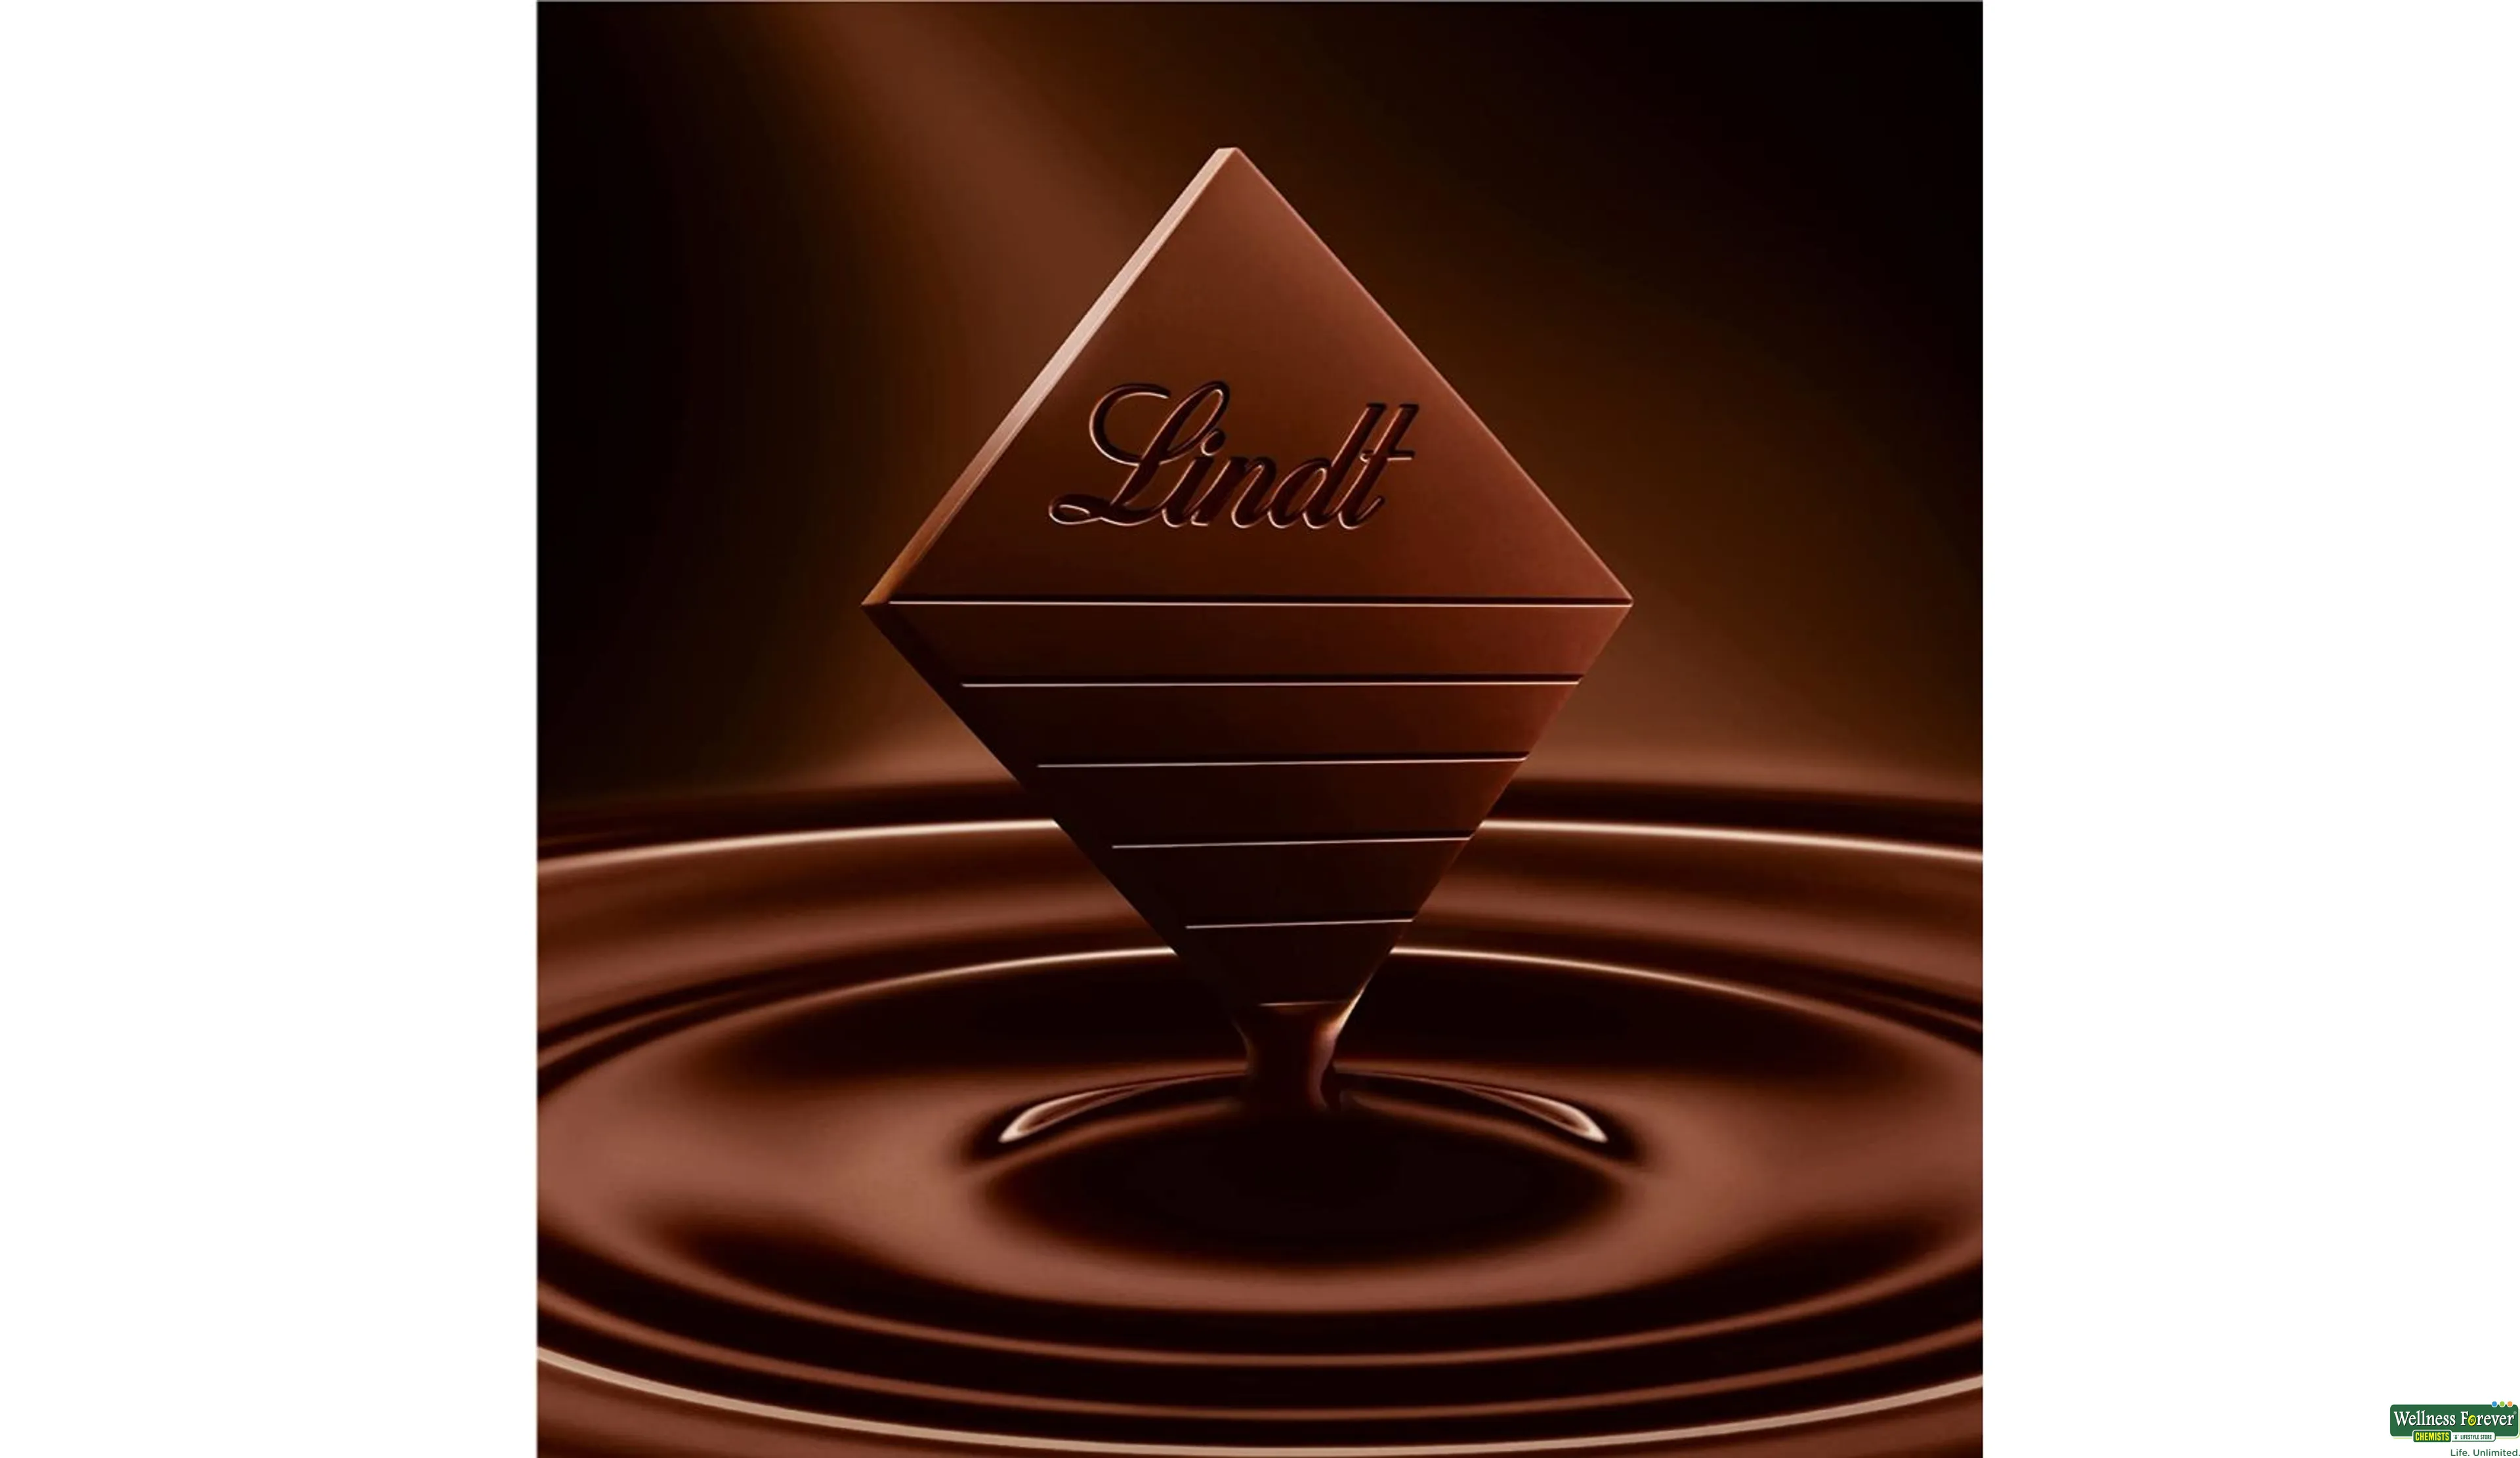 LINDT CHOC EXCE COCOA DARK 90% 100GM- 3, 100GM, 